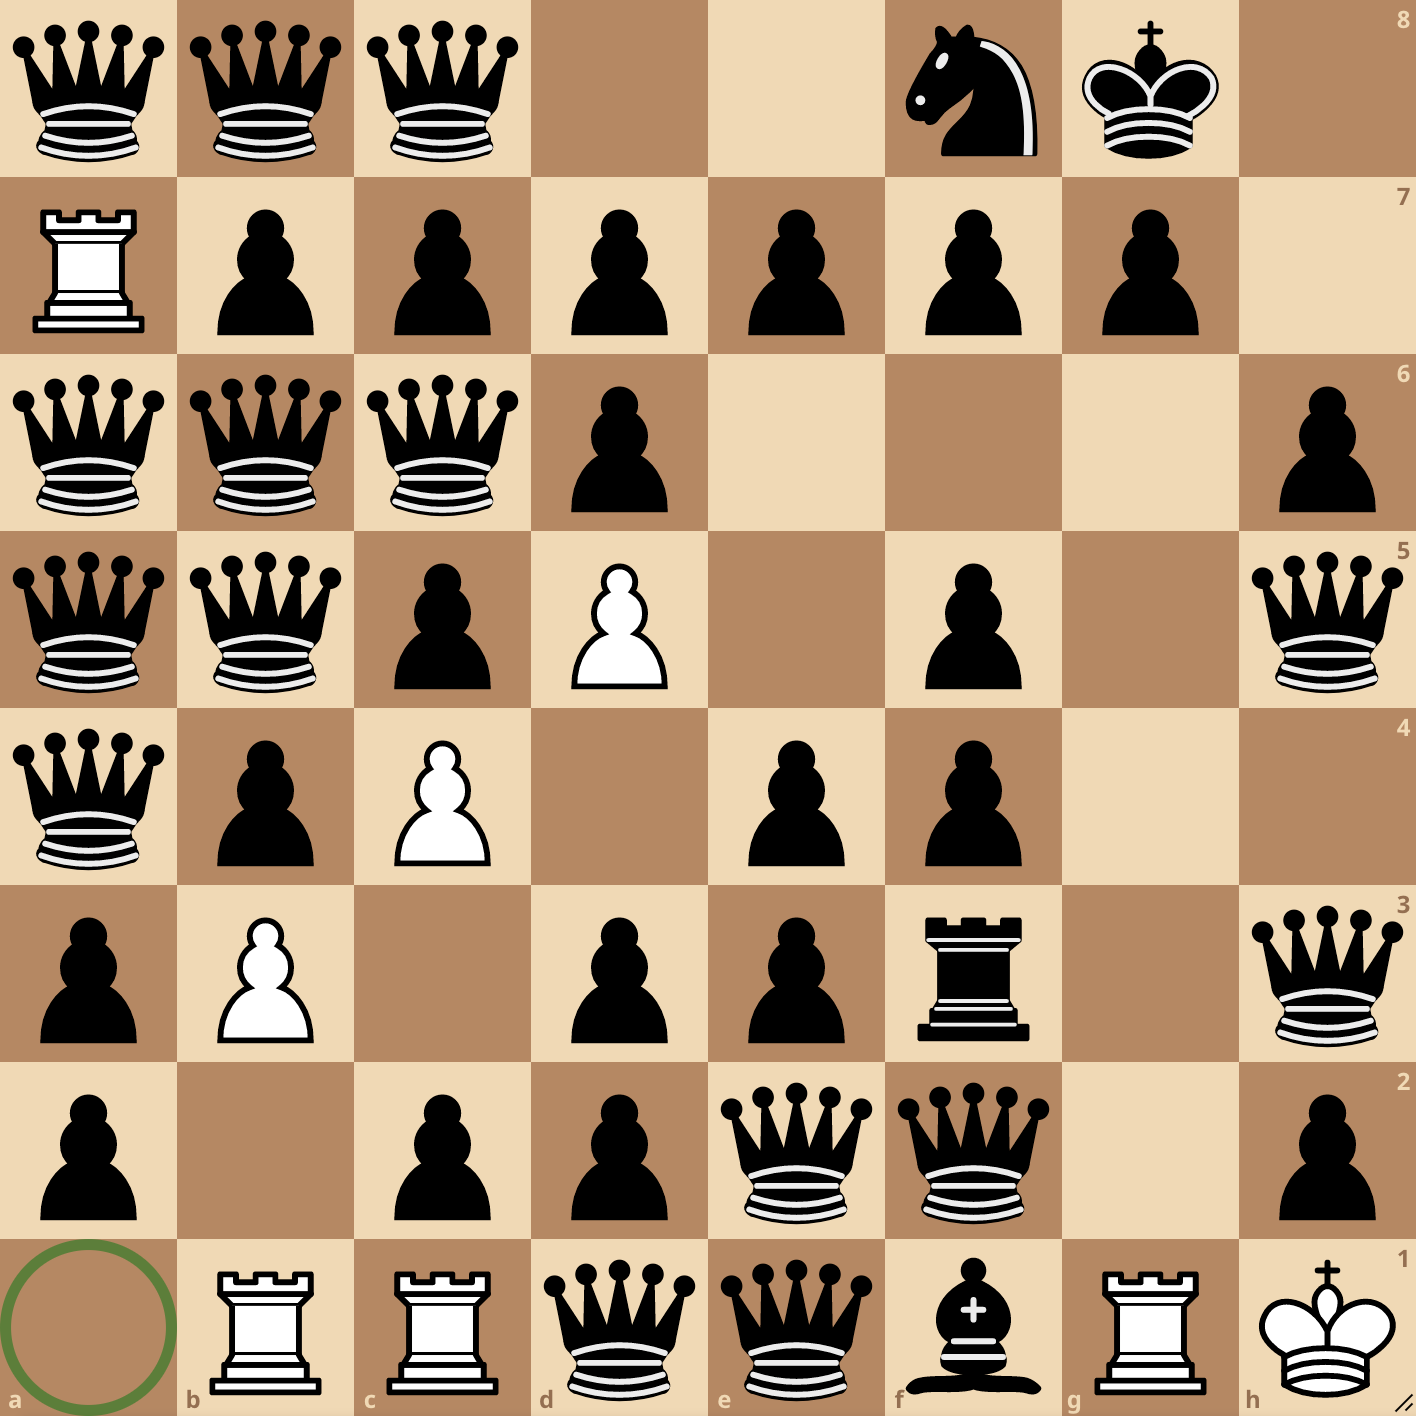 A chess board with a1 at the bottom left. A green circle marks a1. The board's FEN is below.